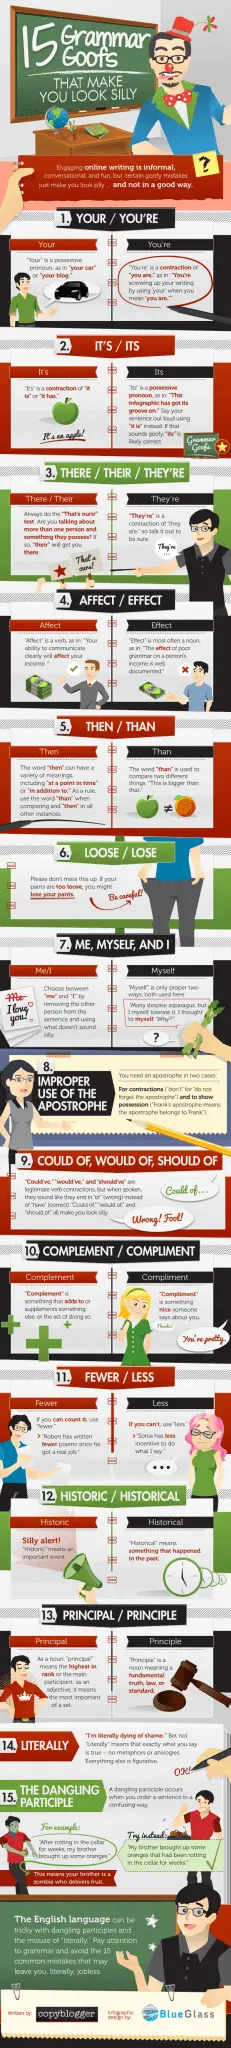 15 Grammar Goofs that make you look silly (Infographic)